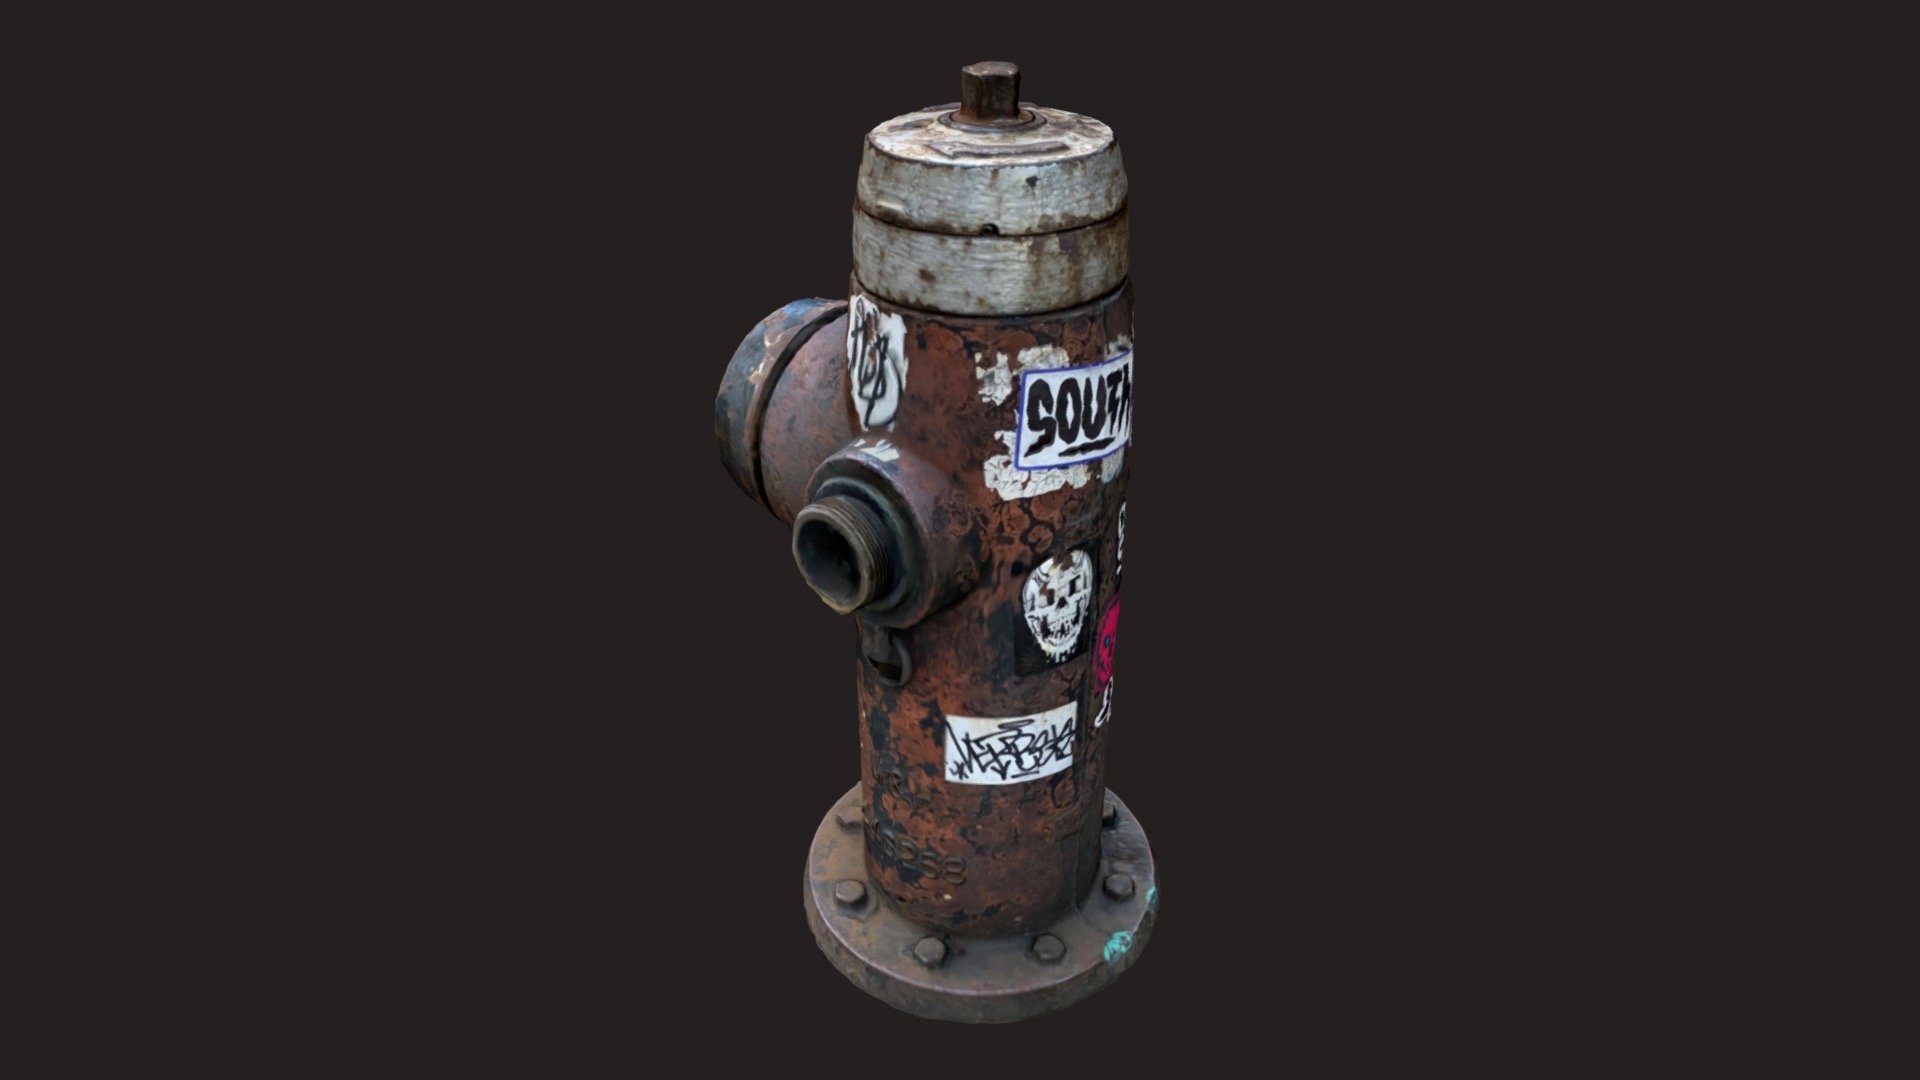 3D scan of a yet another graffiti hydrant. Spotted in my recent trip to NYC. (70+ Images, Photo Mode)

Created with Polycam - Day 262: Graffiti Hydrant - Buy Royalty Free 3D model by uttamg911 3d model